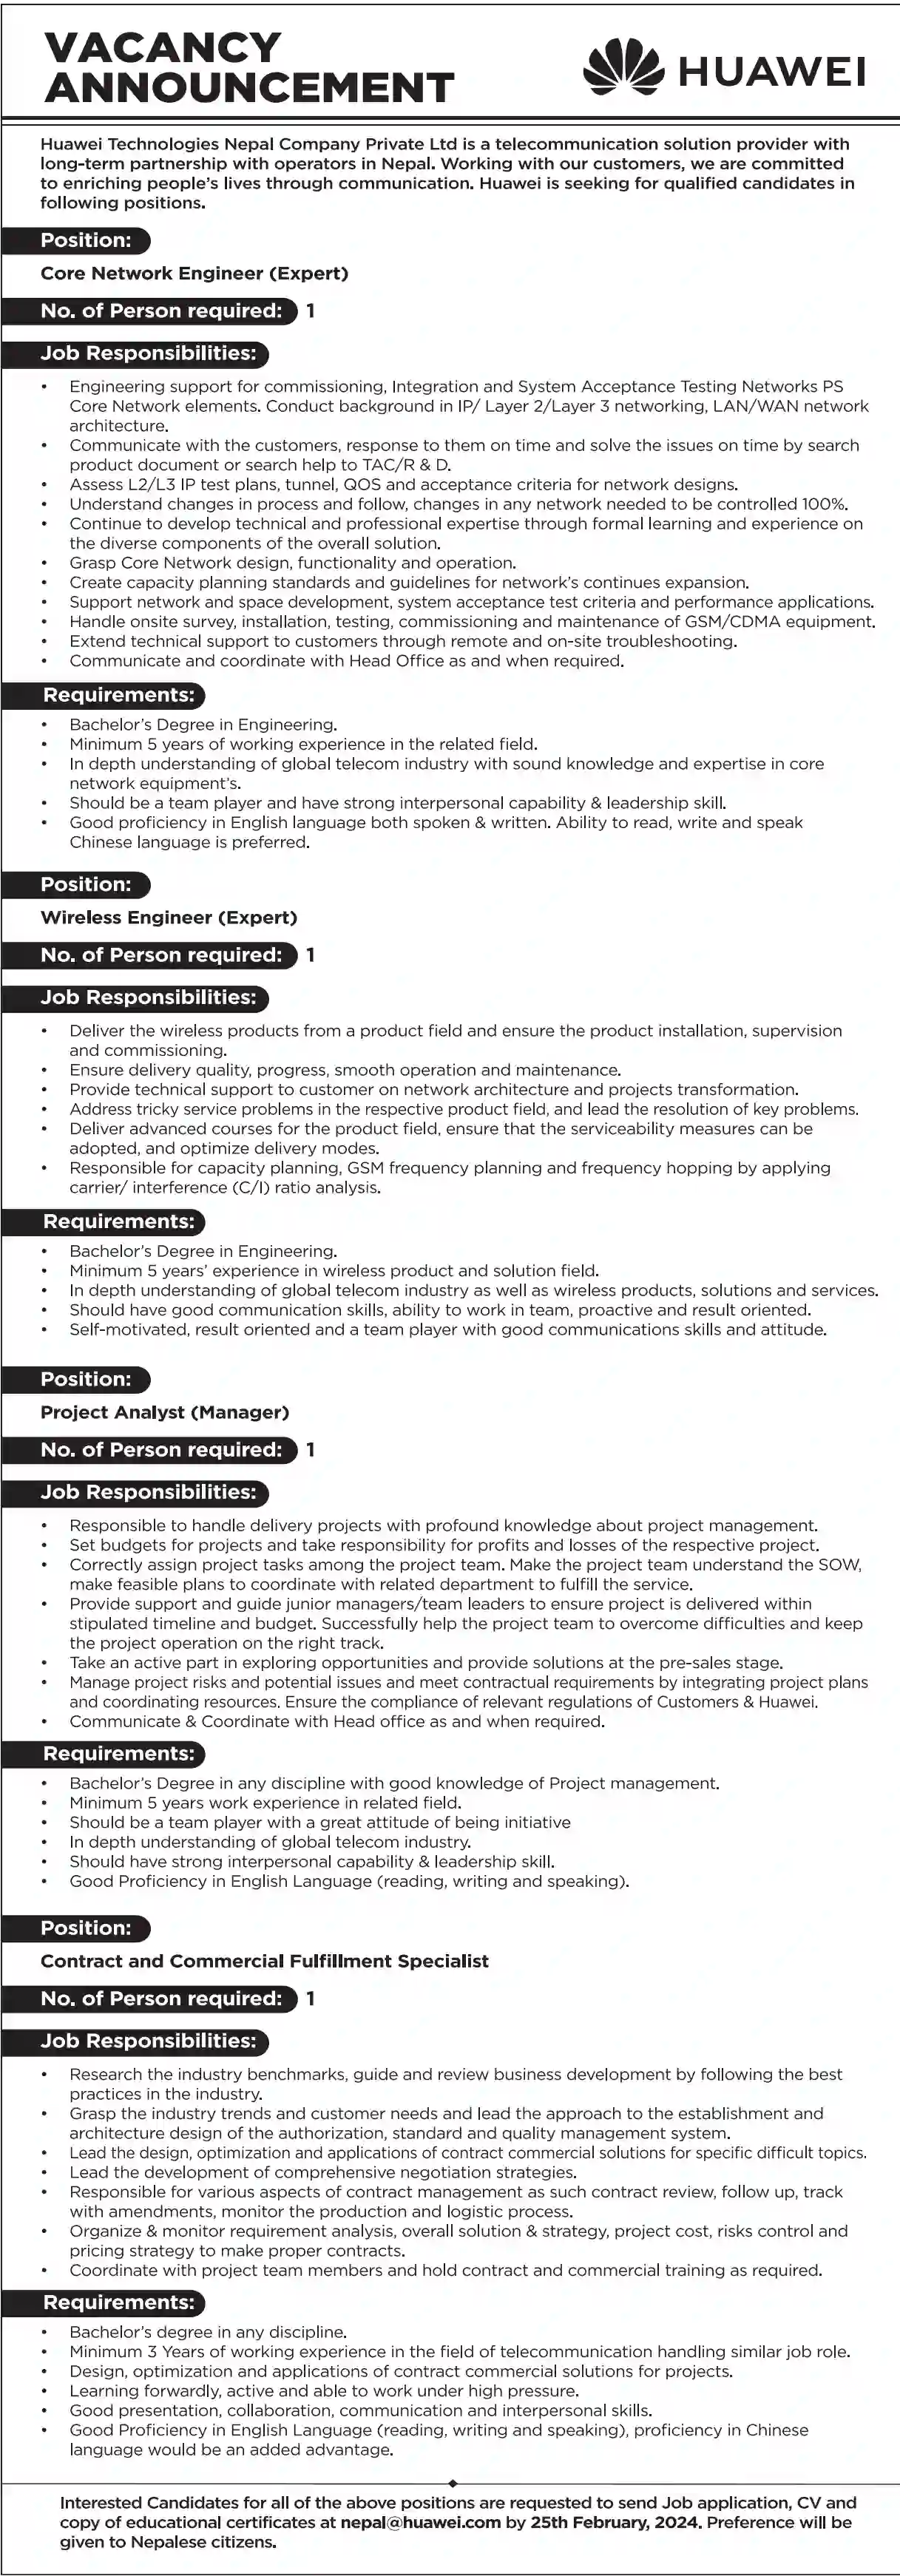 huawei-nepal-job-vacancies-core-network-wireless-engineer-project-analyst-contract-commercial-specialist-2080